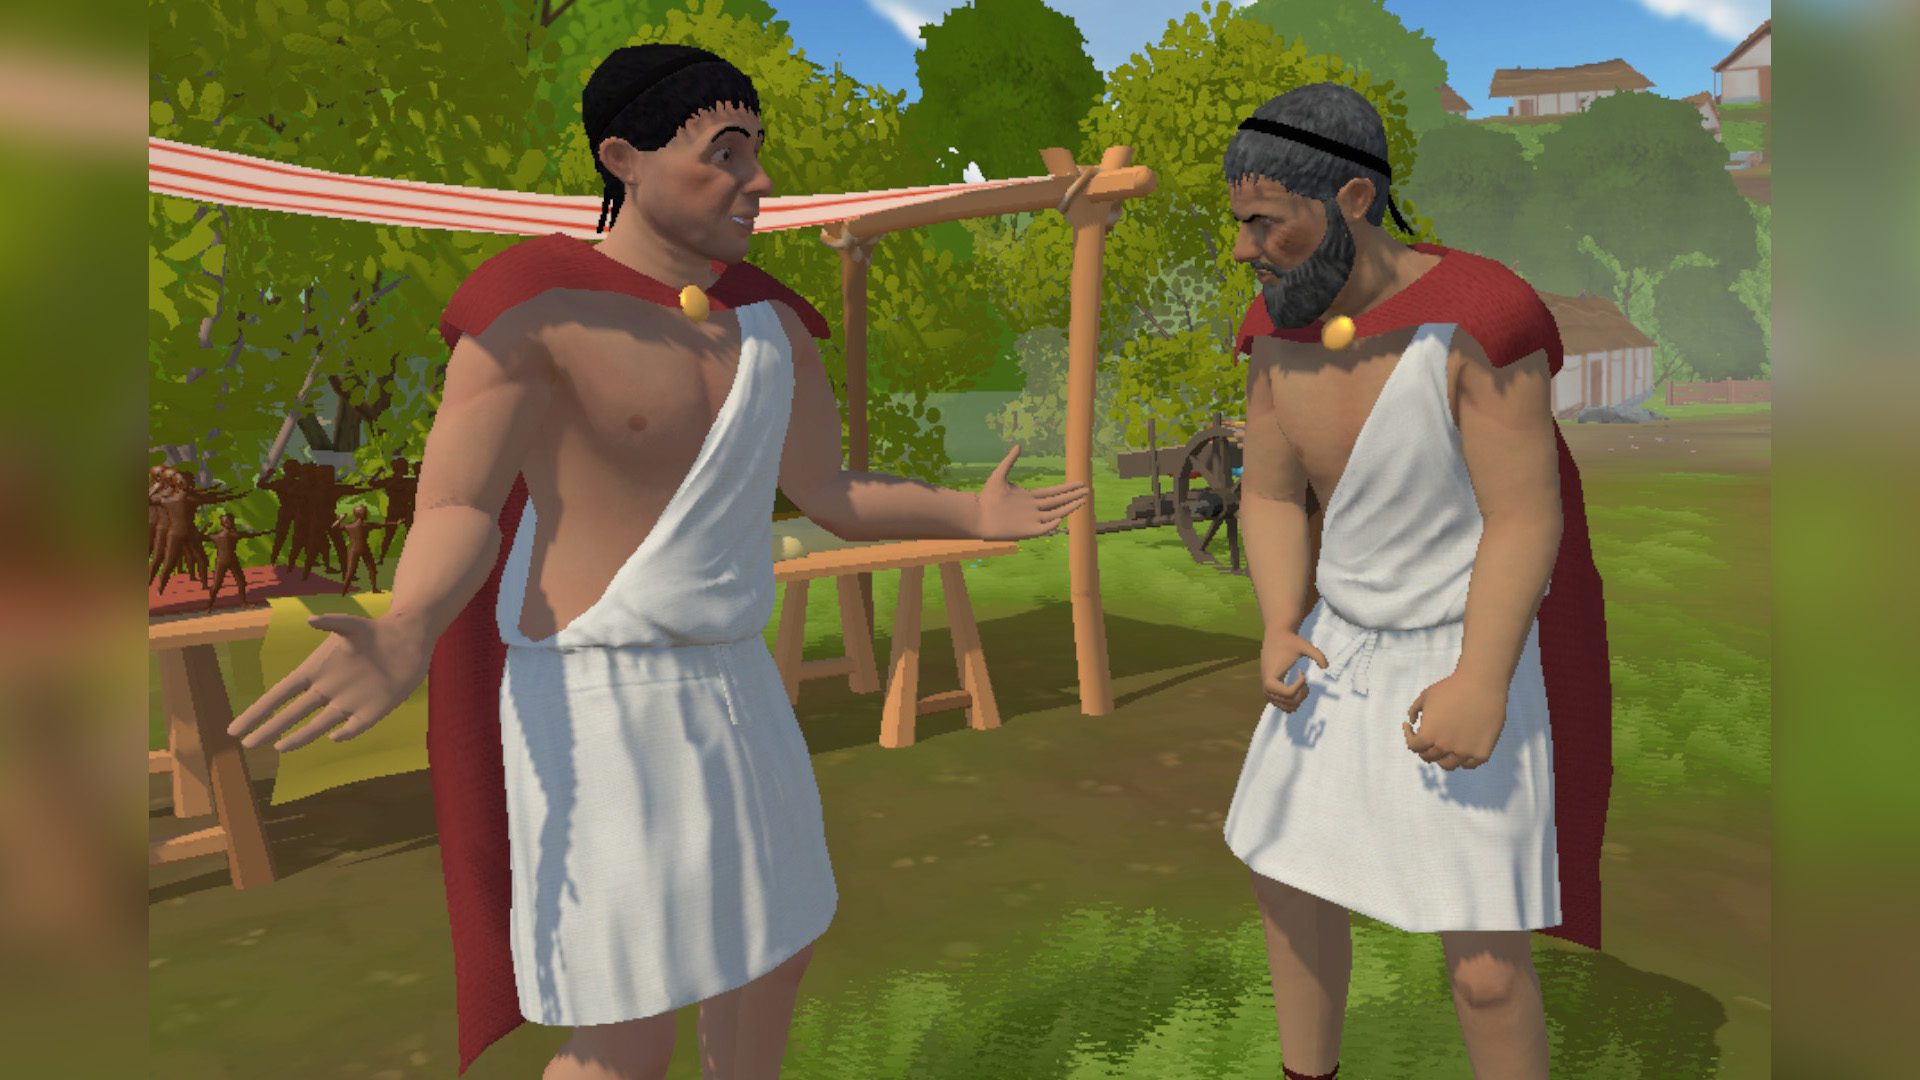 New VR Experience Transports Users to Ancient Greece Virtual Reality Oracle